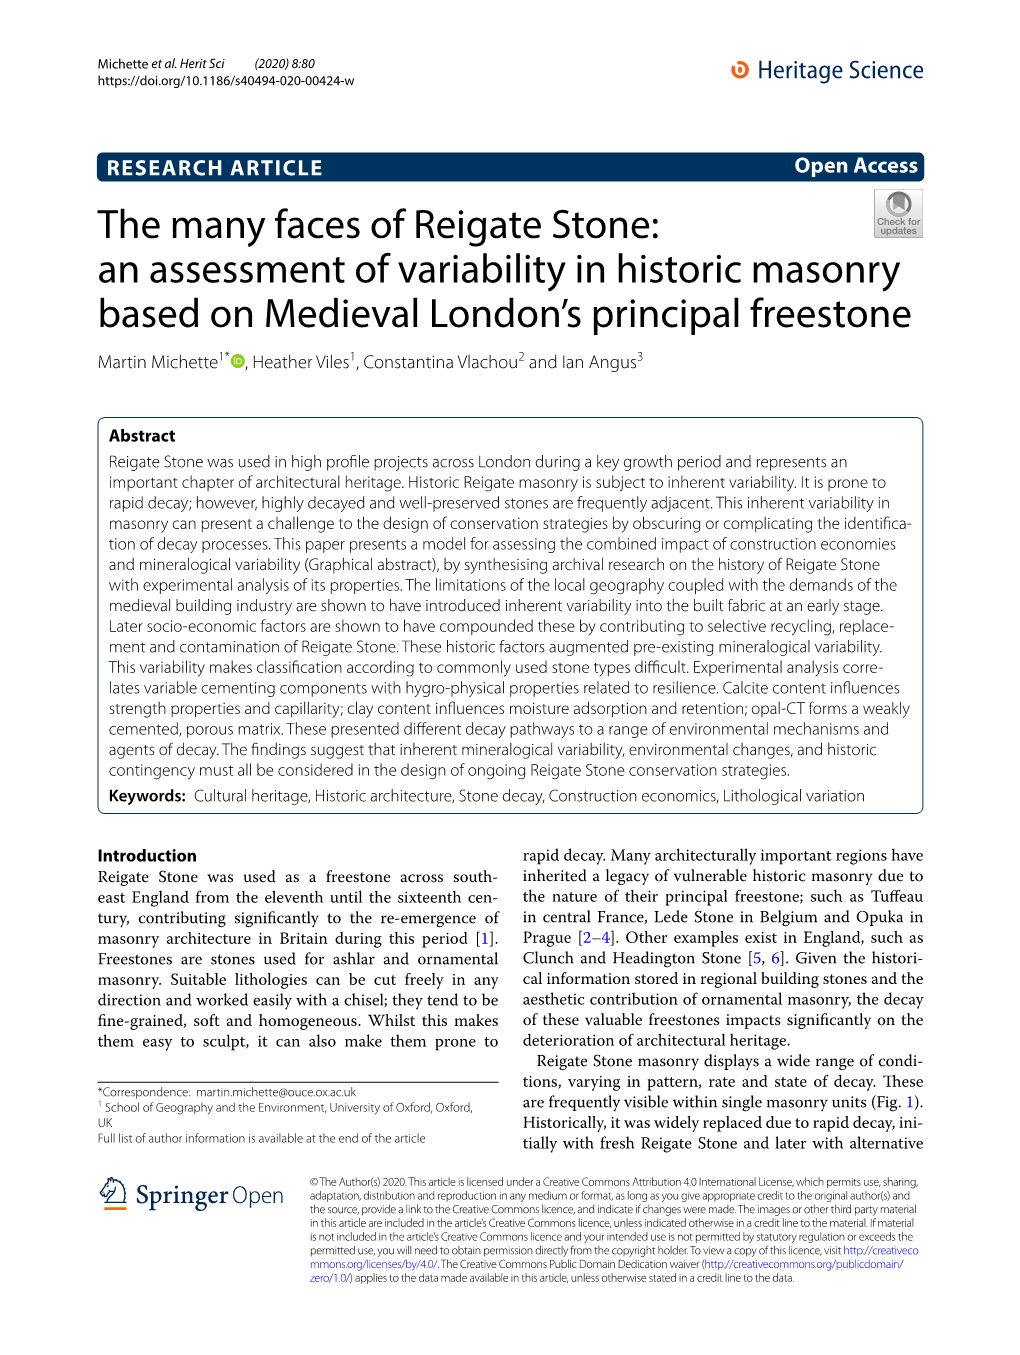 The Many Faces of Reigate Stone: an Assessment of Variability in Historic